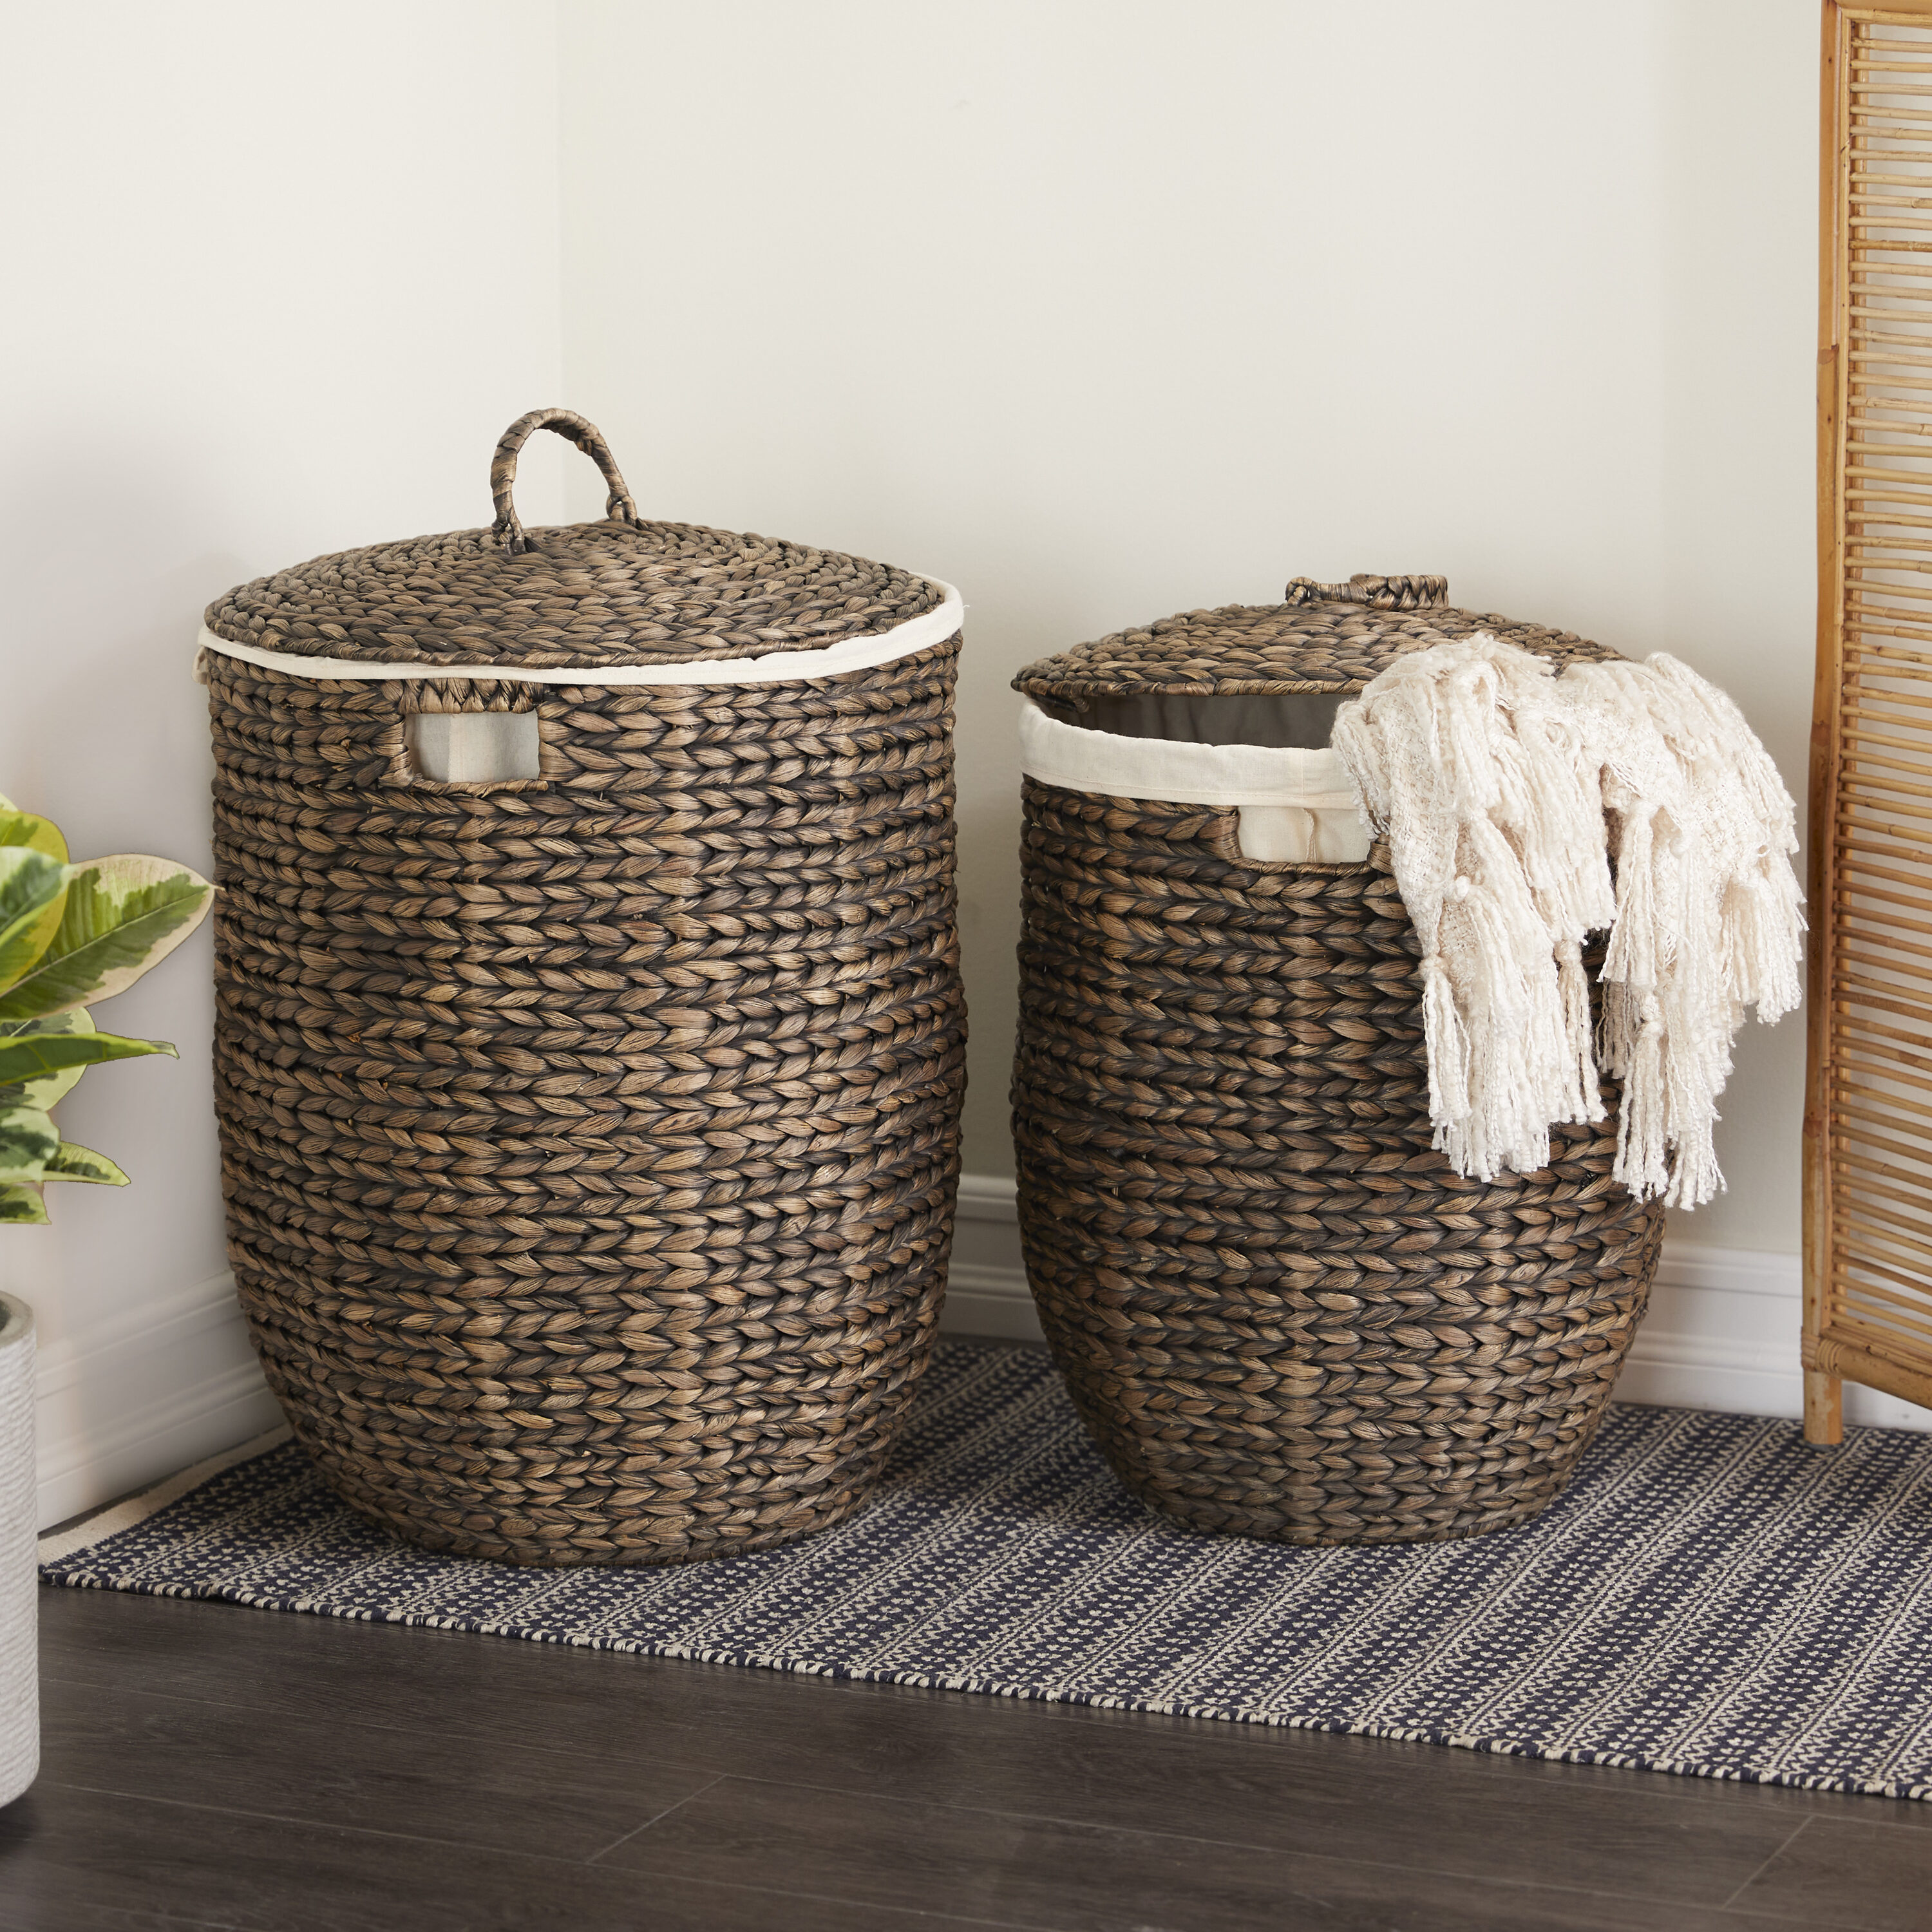 Baskets & Storage Containers – Lowe's